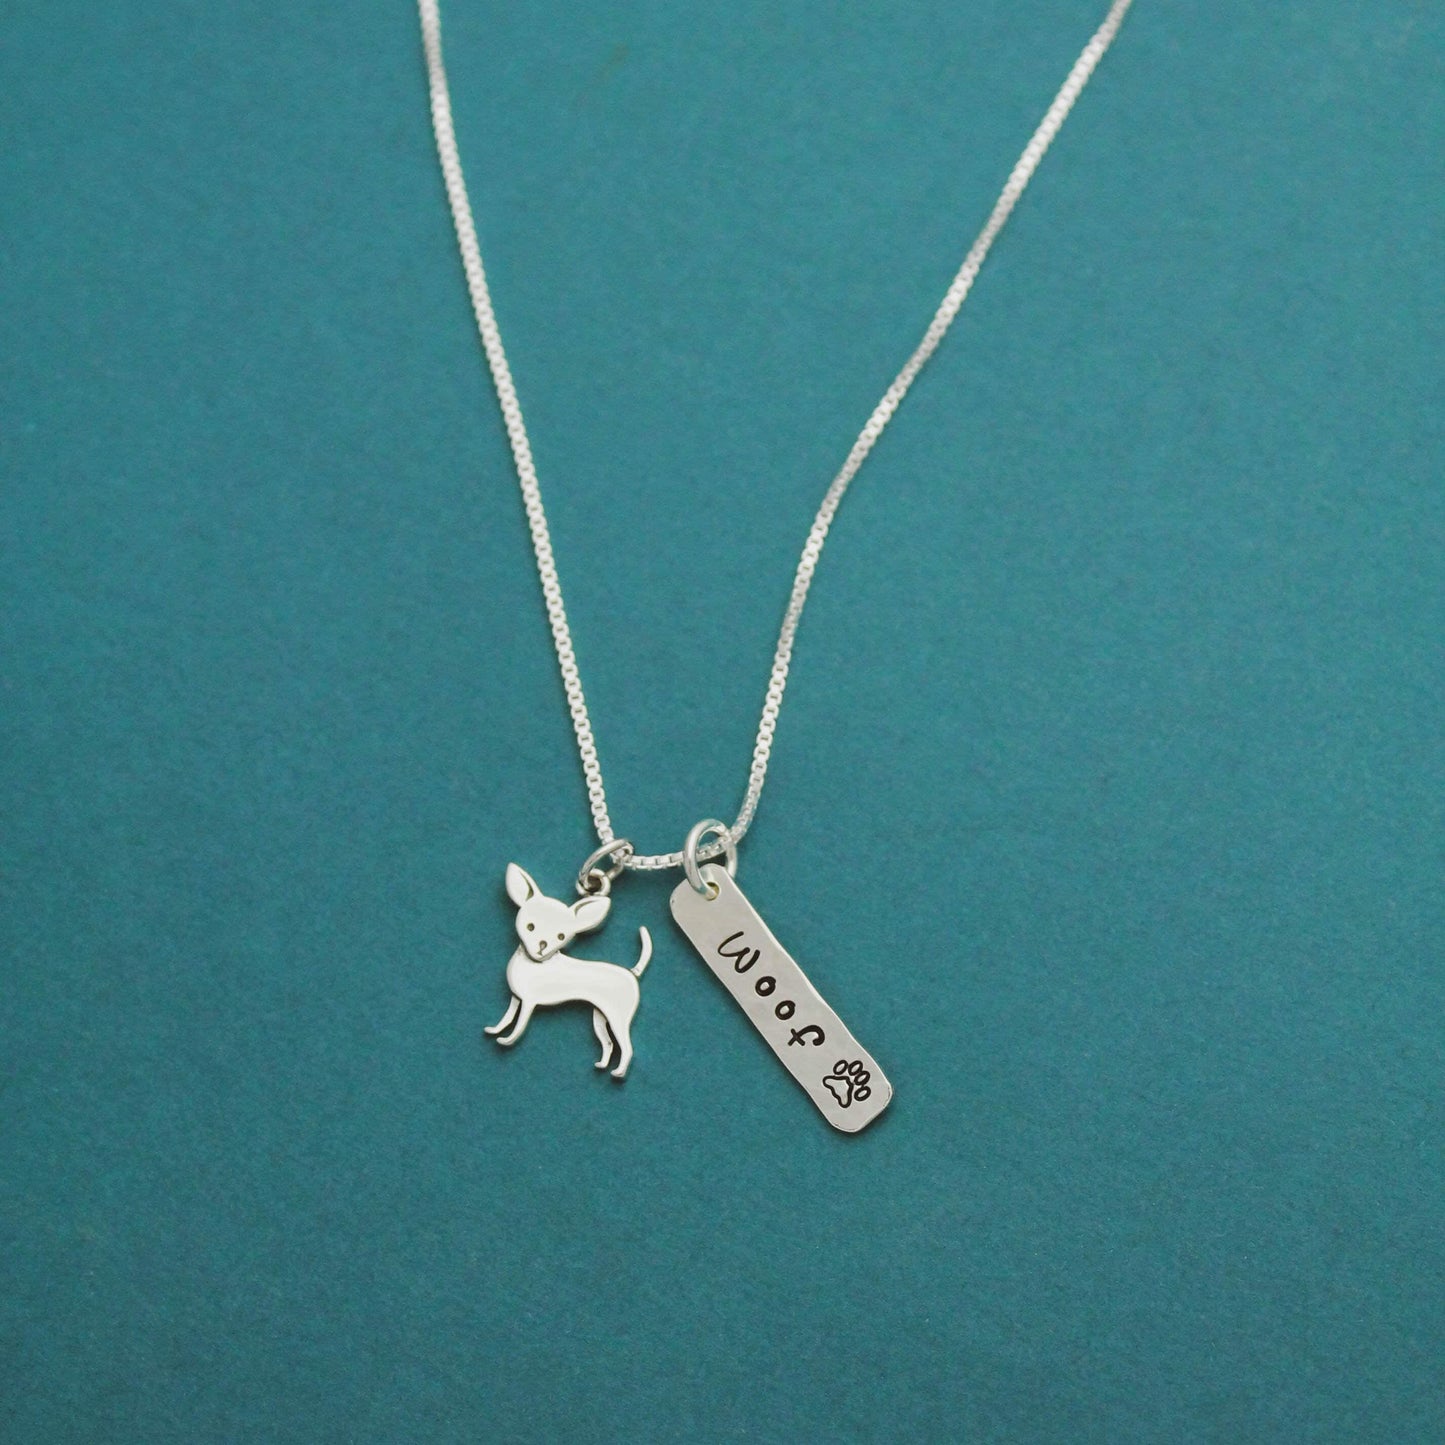 Chihuahua Necklace, Sterling Silver Chihuahua Dog Necklace, Chihuahua Lover Gift, New Pet Gift, Chihuahua Dog Jewelry, Hand Stamped Dog